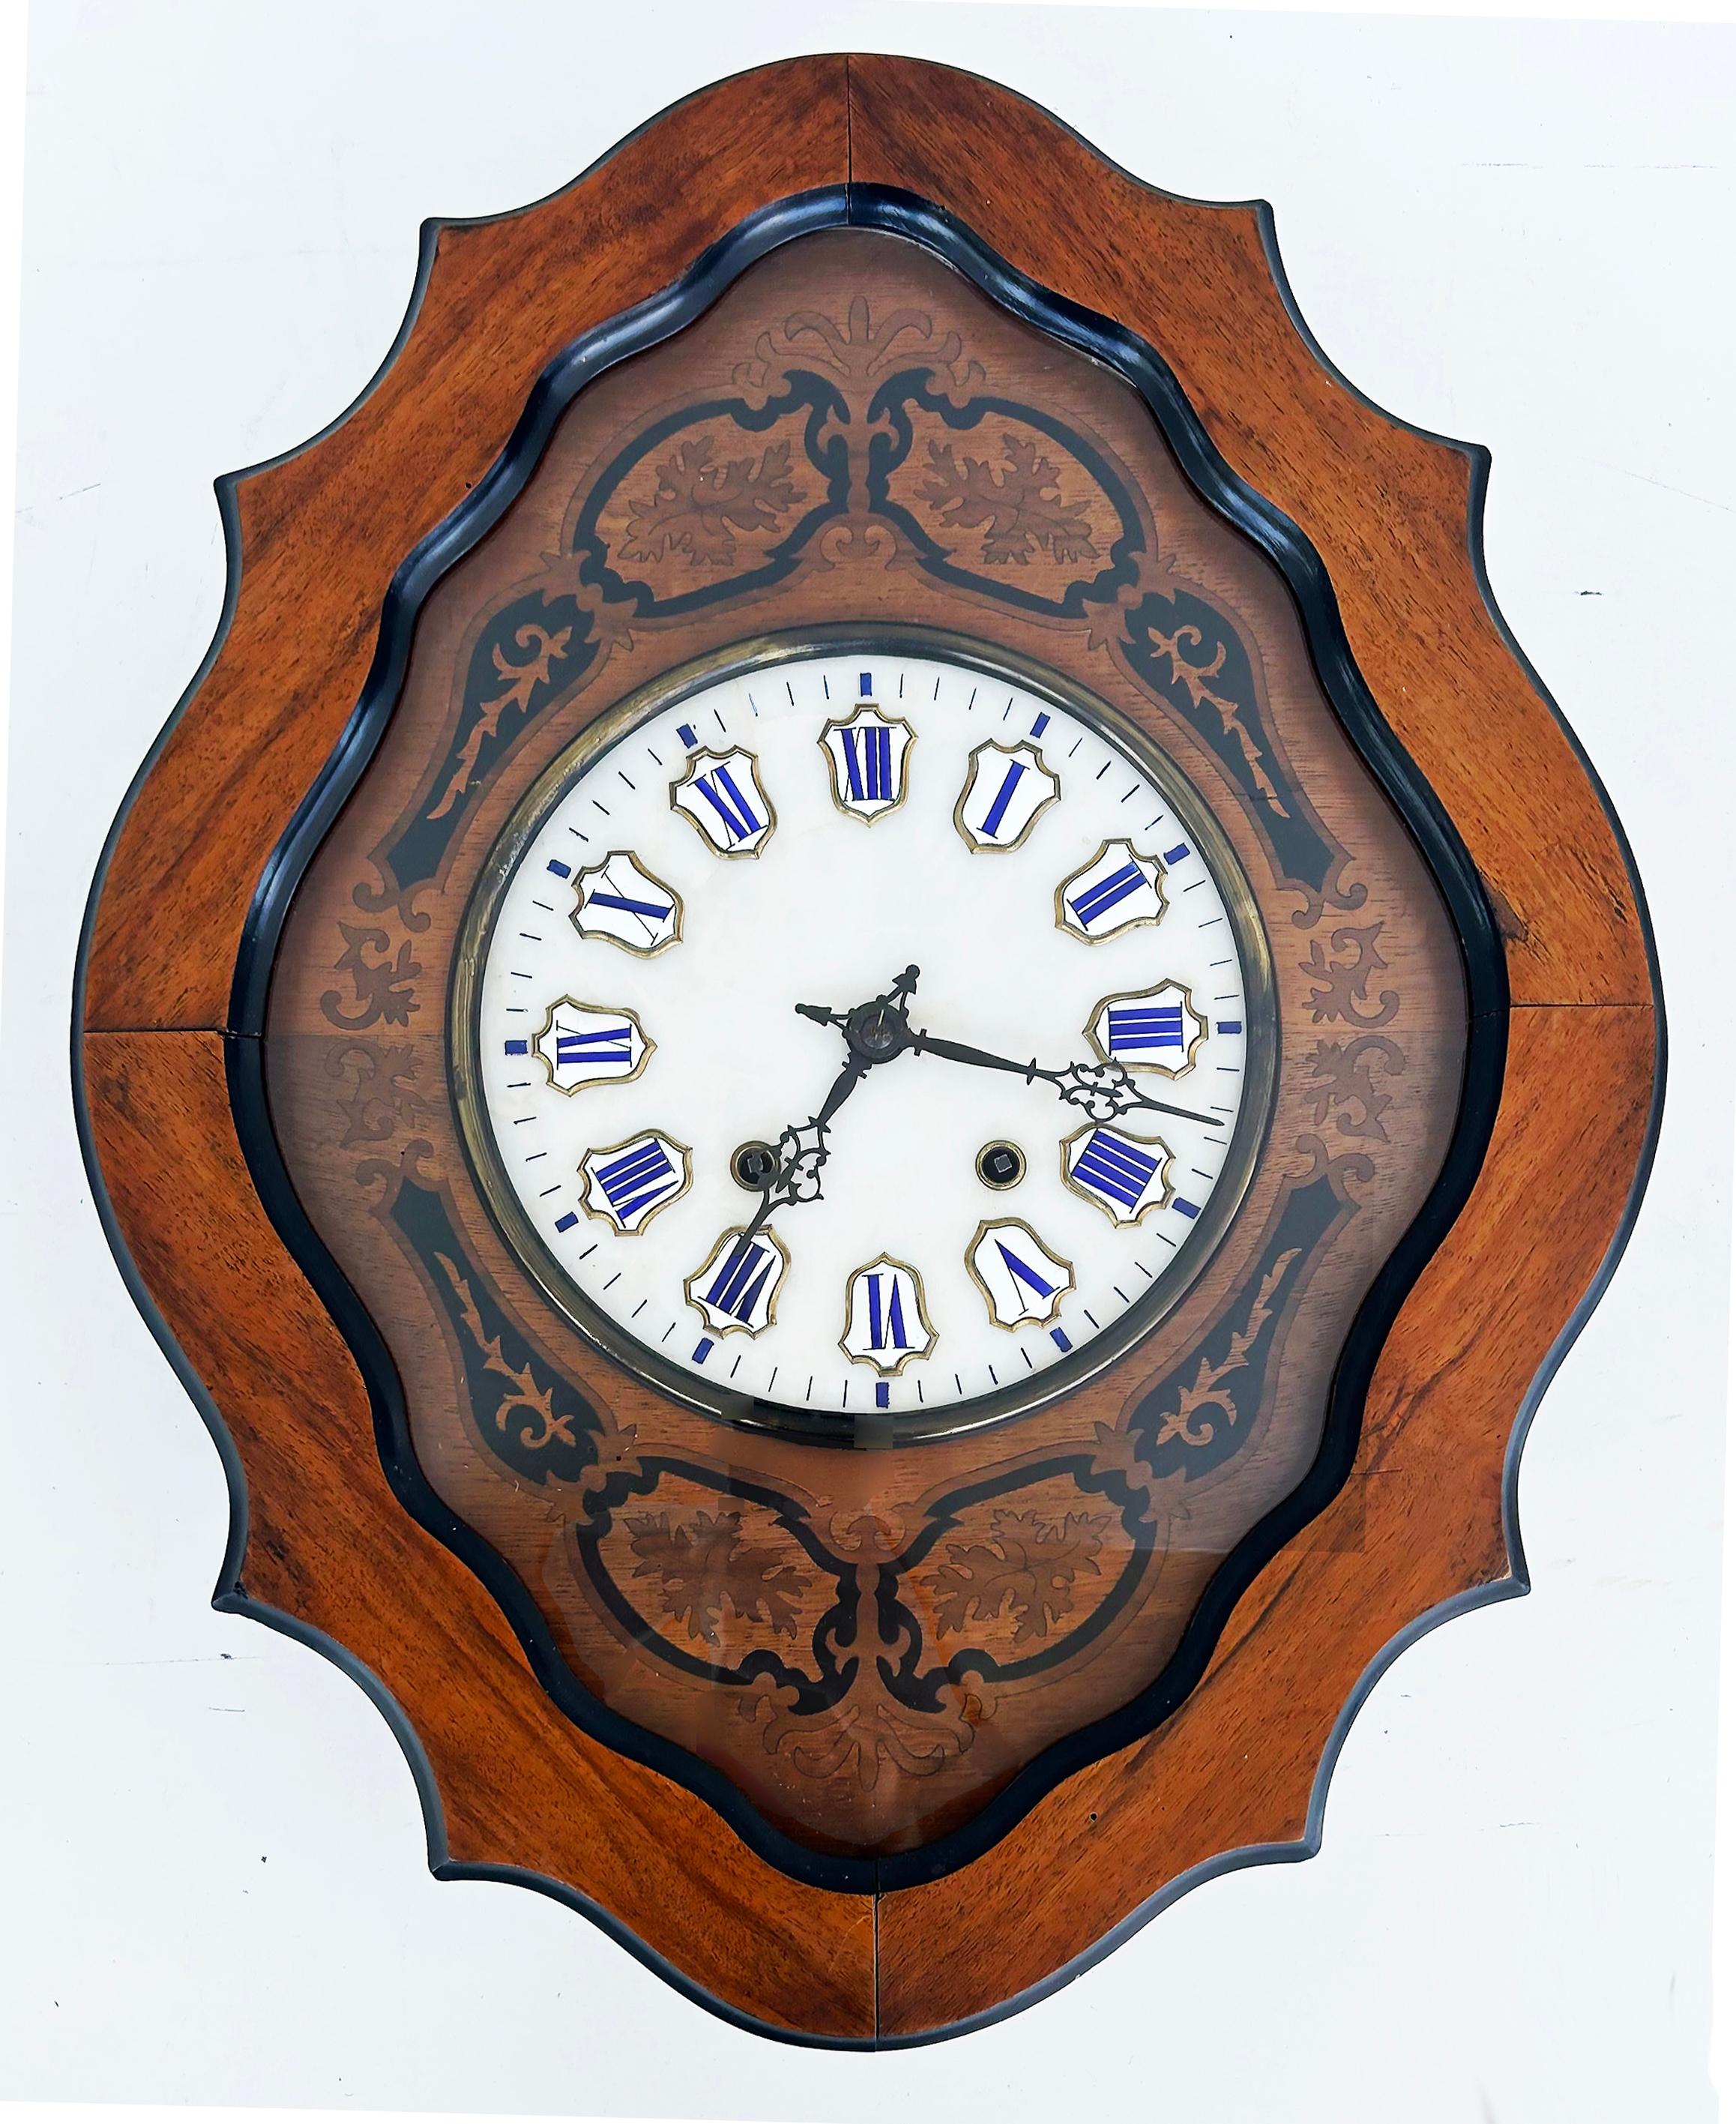 19th Century French Napoleon III Wall Clock, Enamel Face and Wood Marquetry 

Offered for sale is a 19th-century French Napoleon III wall clock acquired in the  Pyrenees region of France bordering Spain.  This lovely wall clock is from the mid to